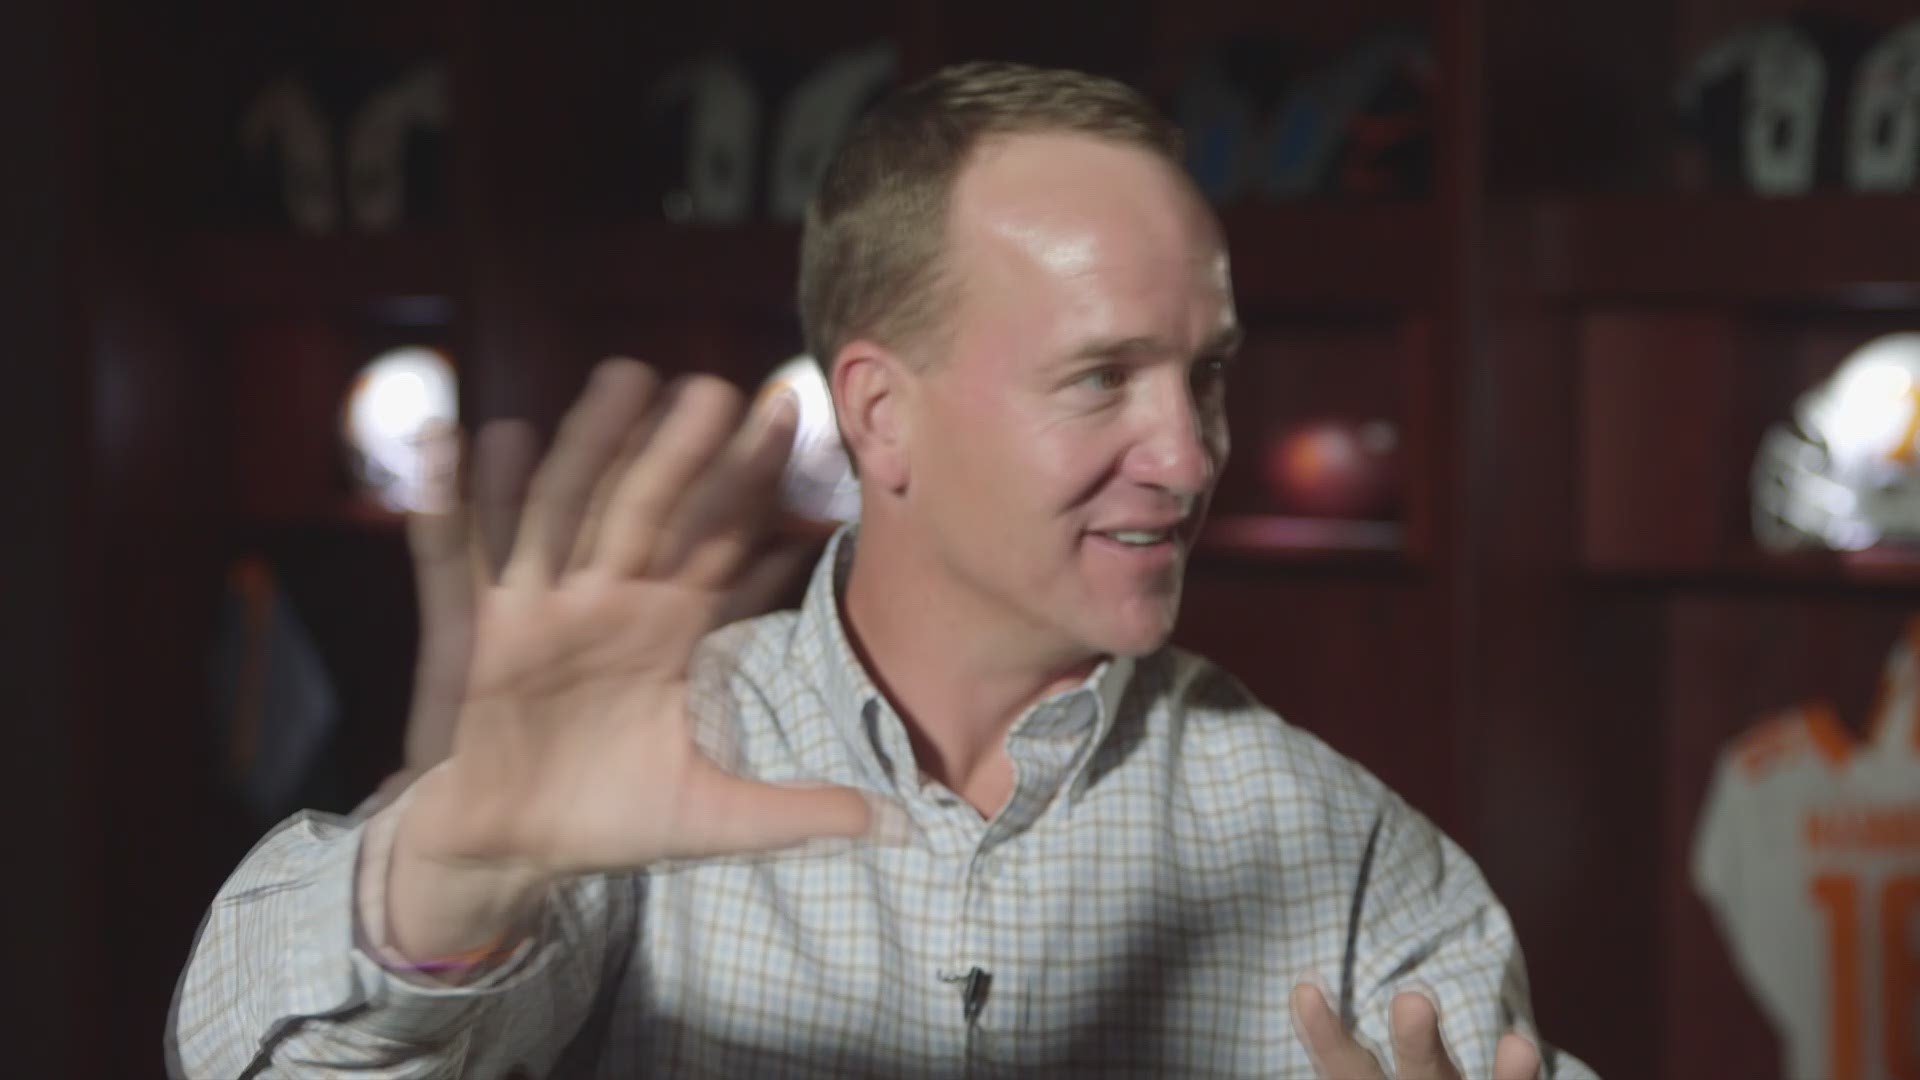 Peyton Manning will be honored by the National Football Foundation during Tennessee's game with Georgia on Saturday. He will be inducted into the College Football Hall of Fame later this year. He personally called the living members of the Hall who played